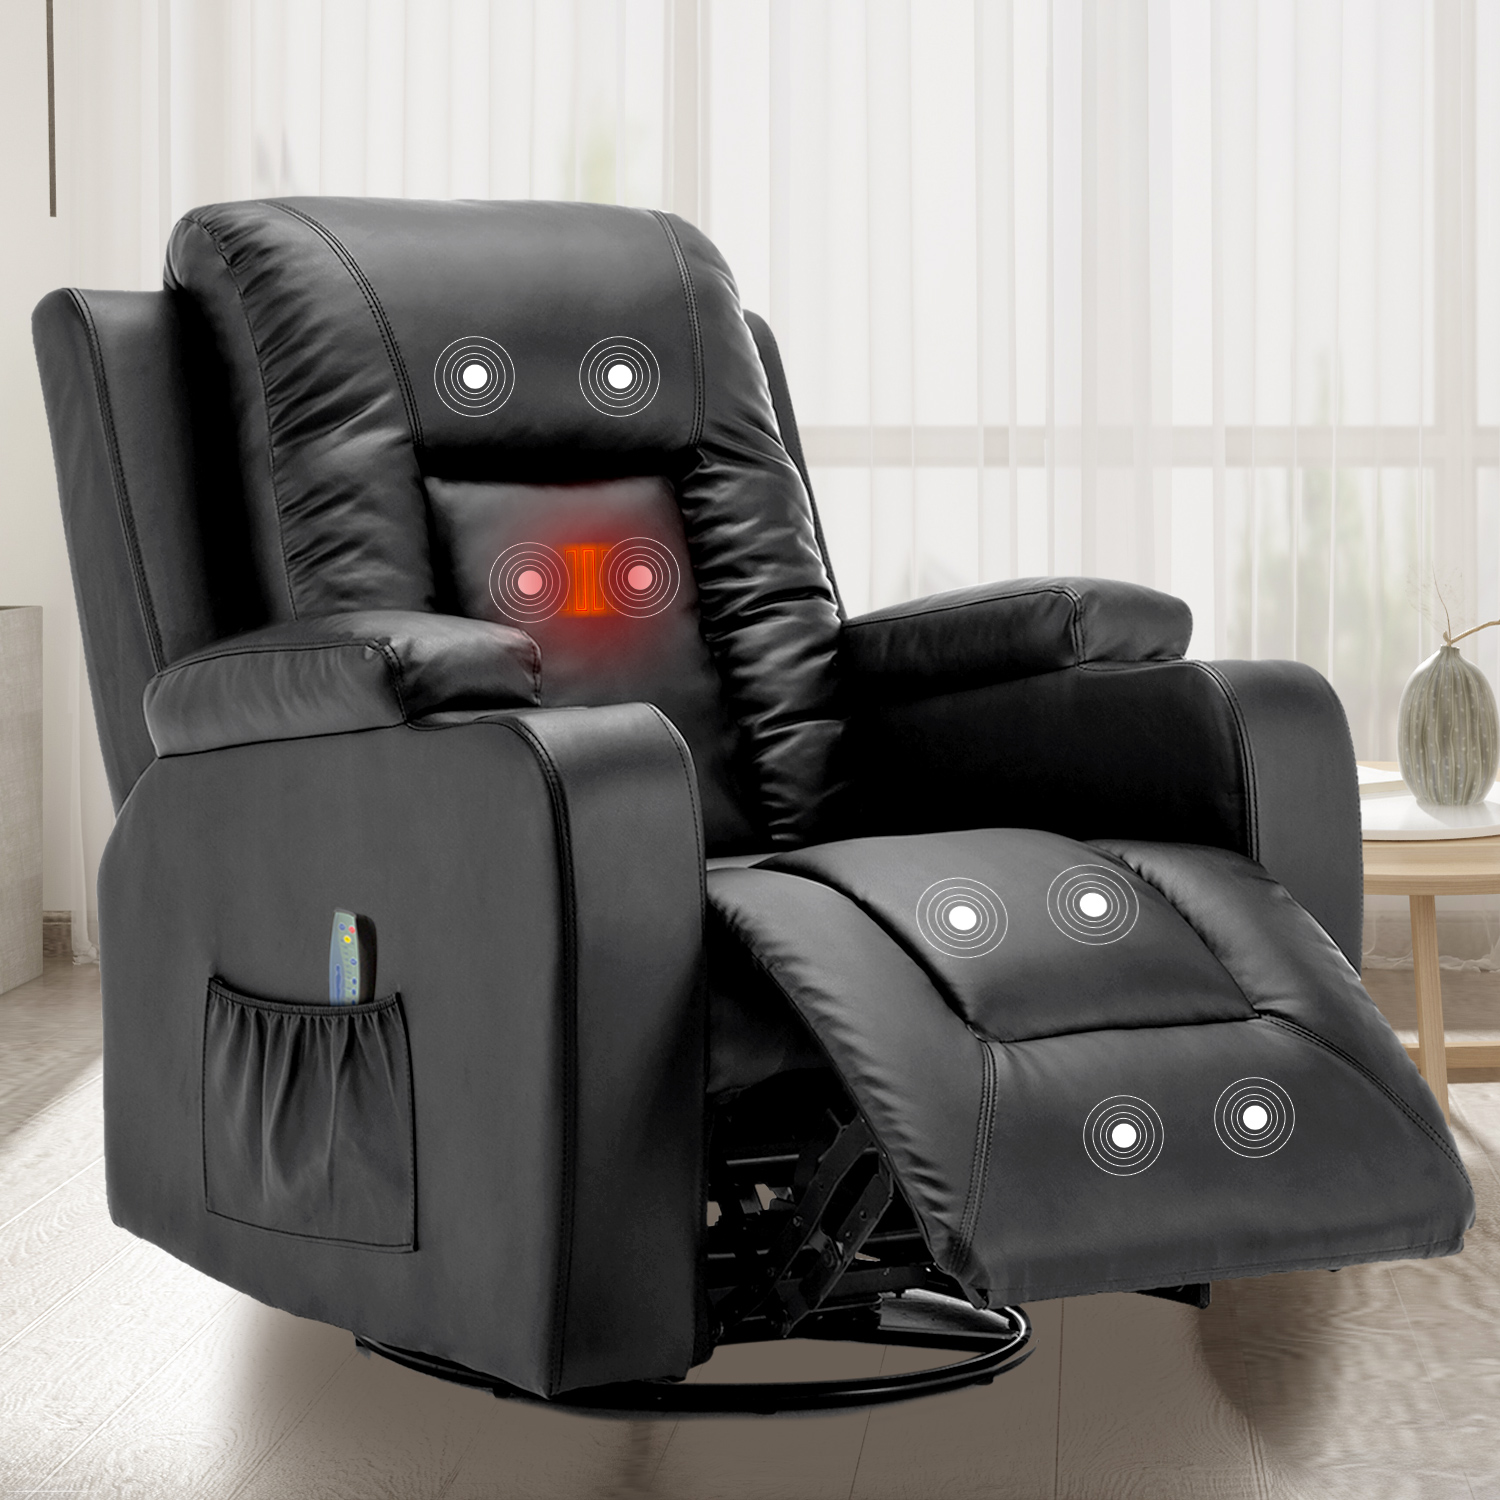 COMHOMA Swivel Rocker Recliner Chair PU Leather Rocking Sofa with Heated Massage, Black - image 1 of 8